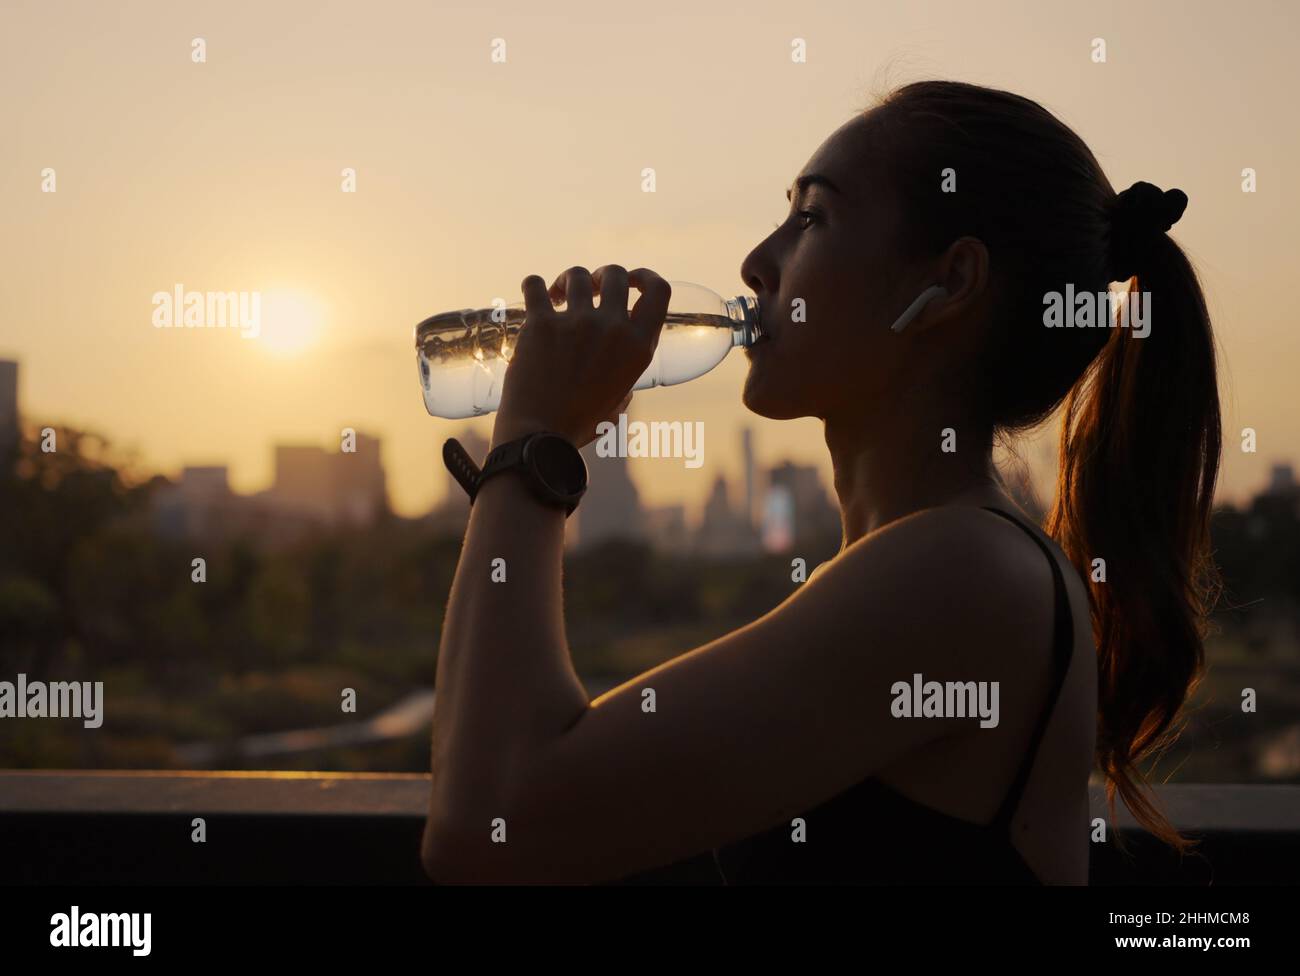 Young woman drinking water after jogging at sunset. Stock Photo